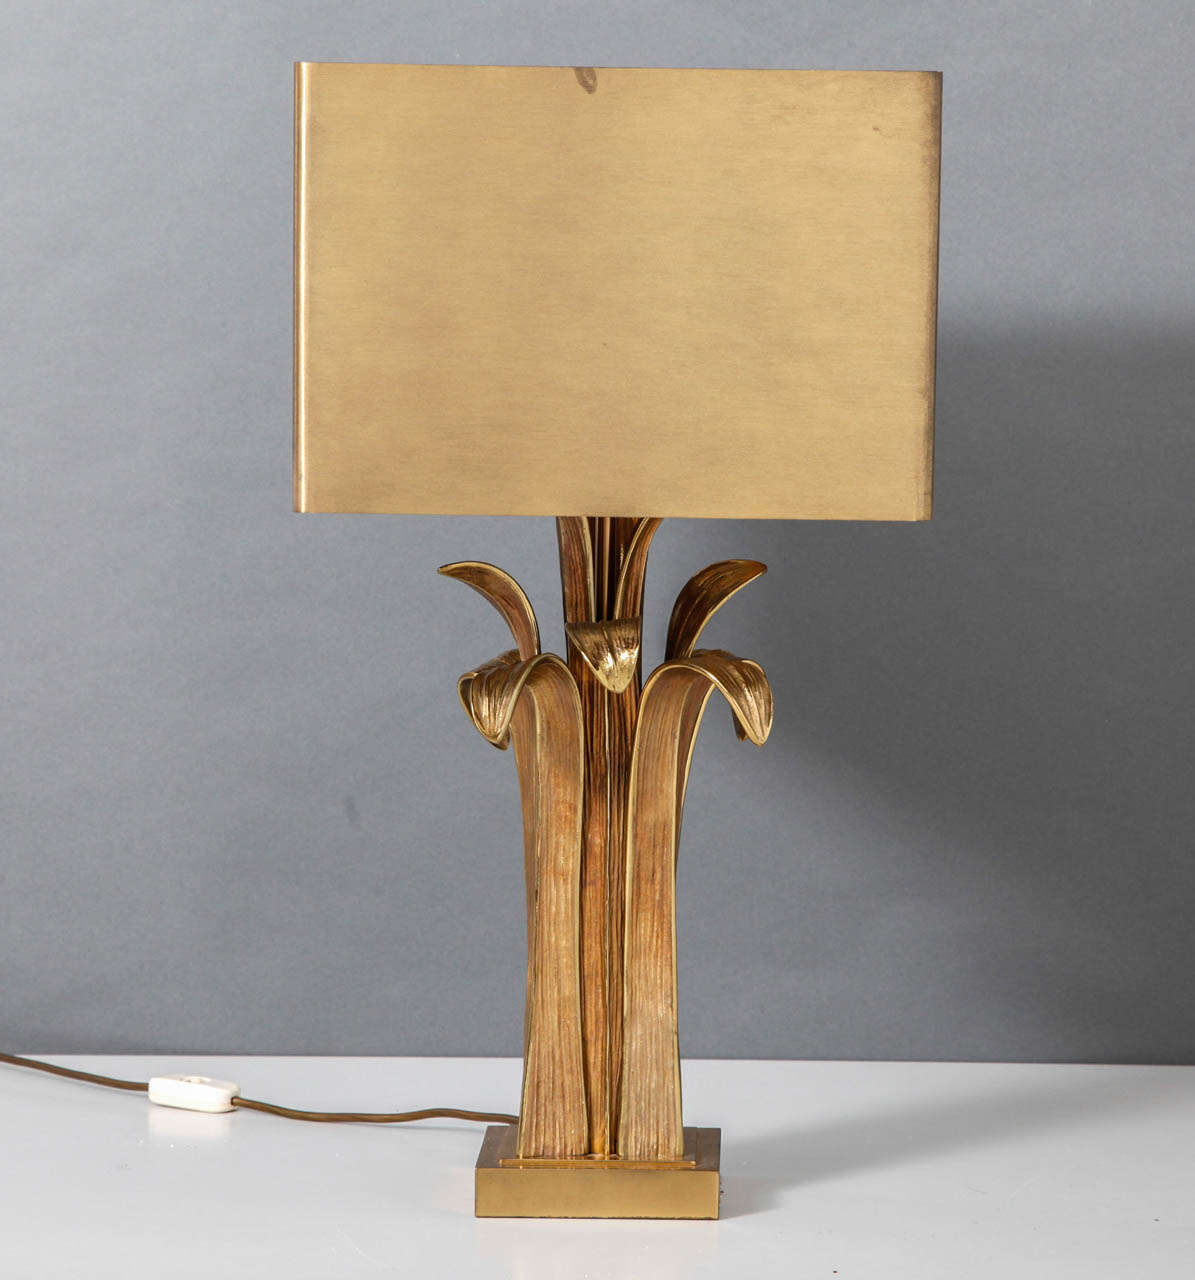 Exquisite pair of bronze sculptural leaf table lamps with bronze shades.

Signed by Maison Charles, France.

Dimension Shades 38cm-38cm-H.26cm.
Base 15cm- 15cm   Total height  69 cm.